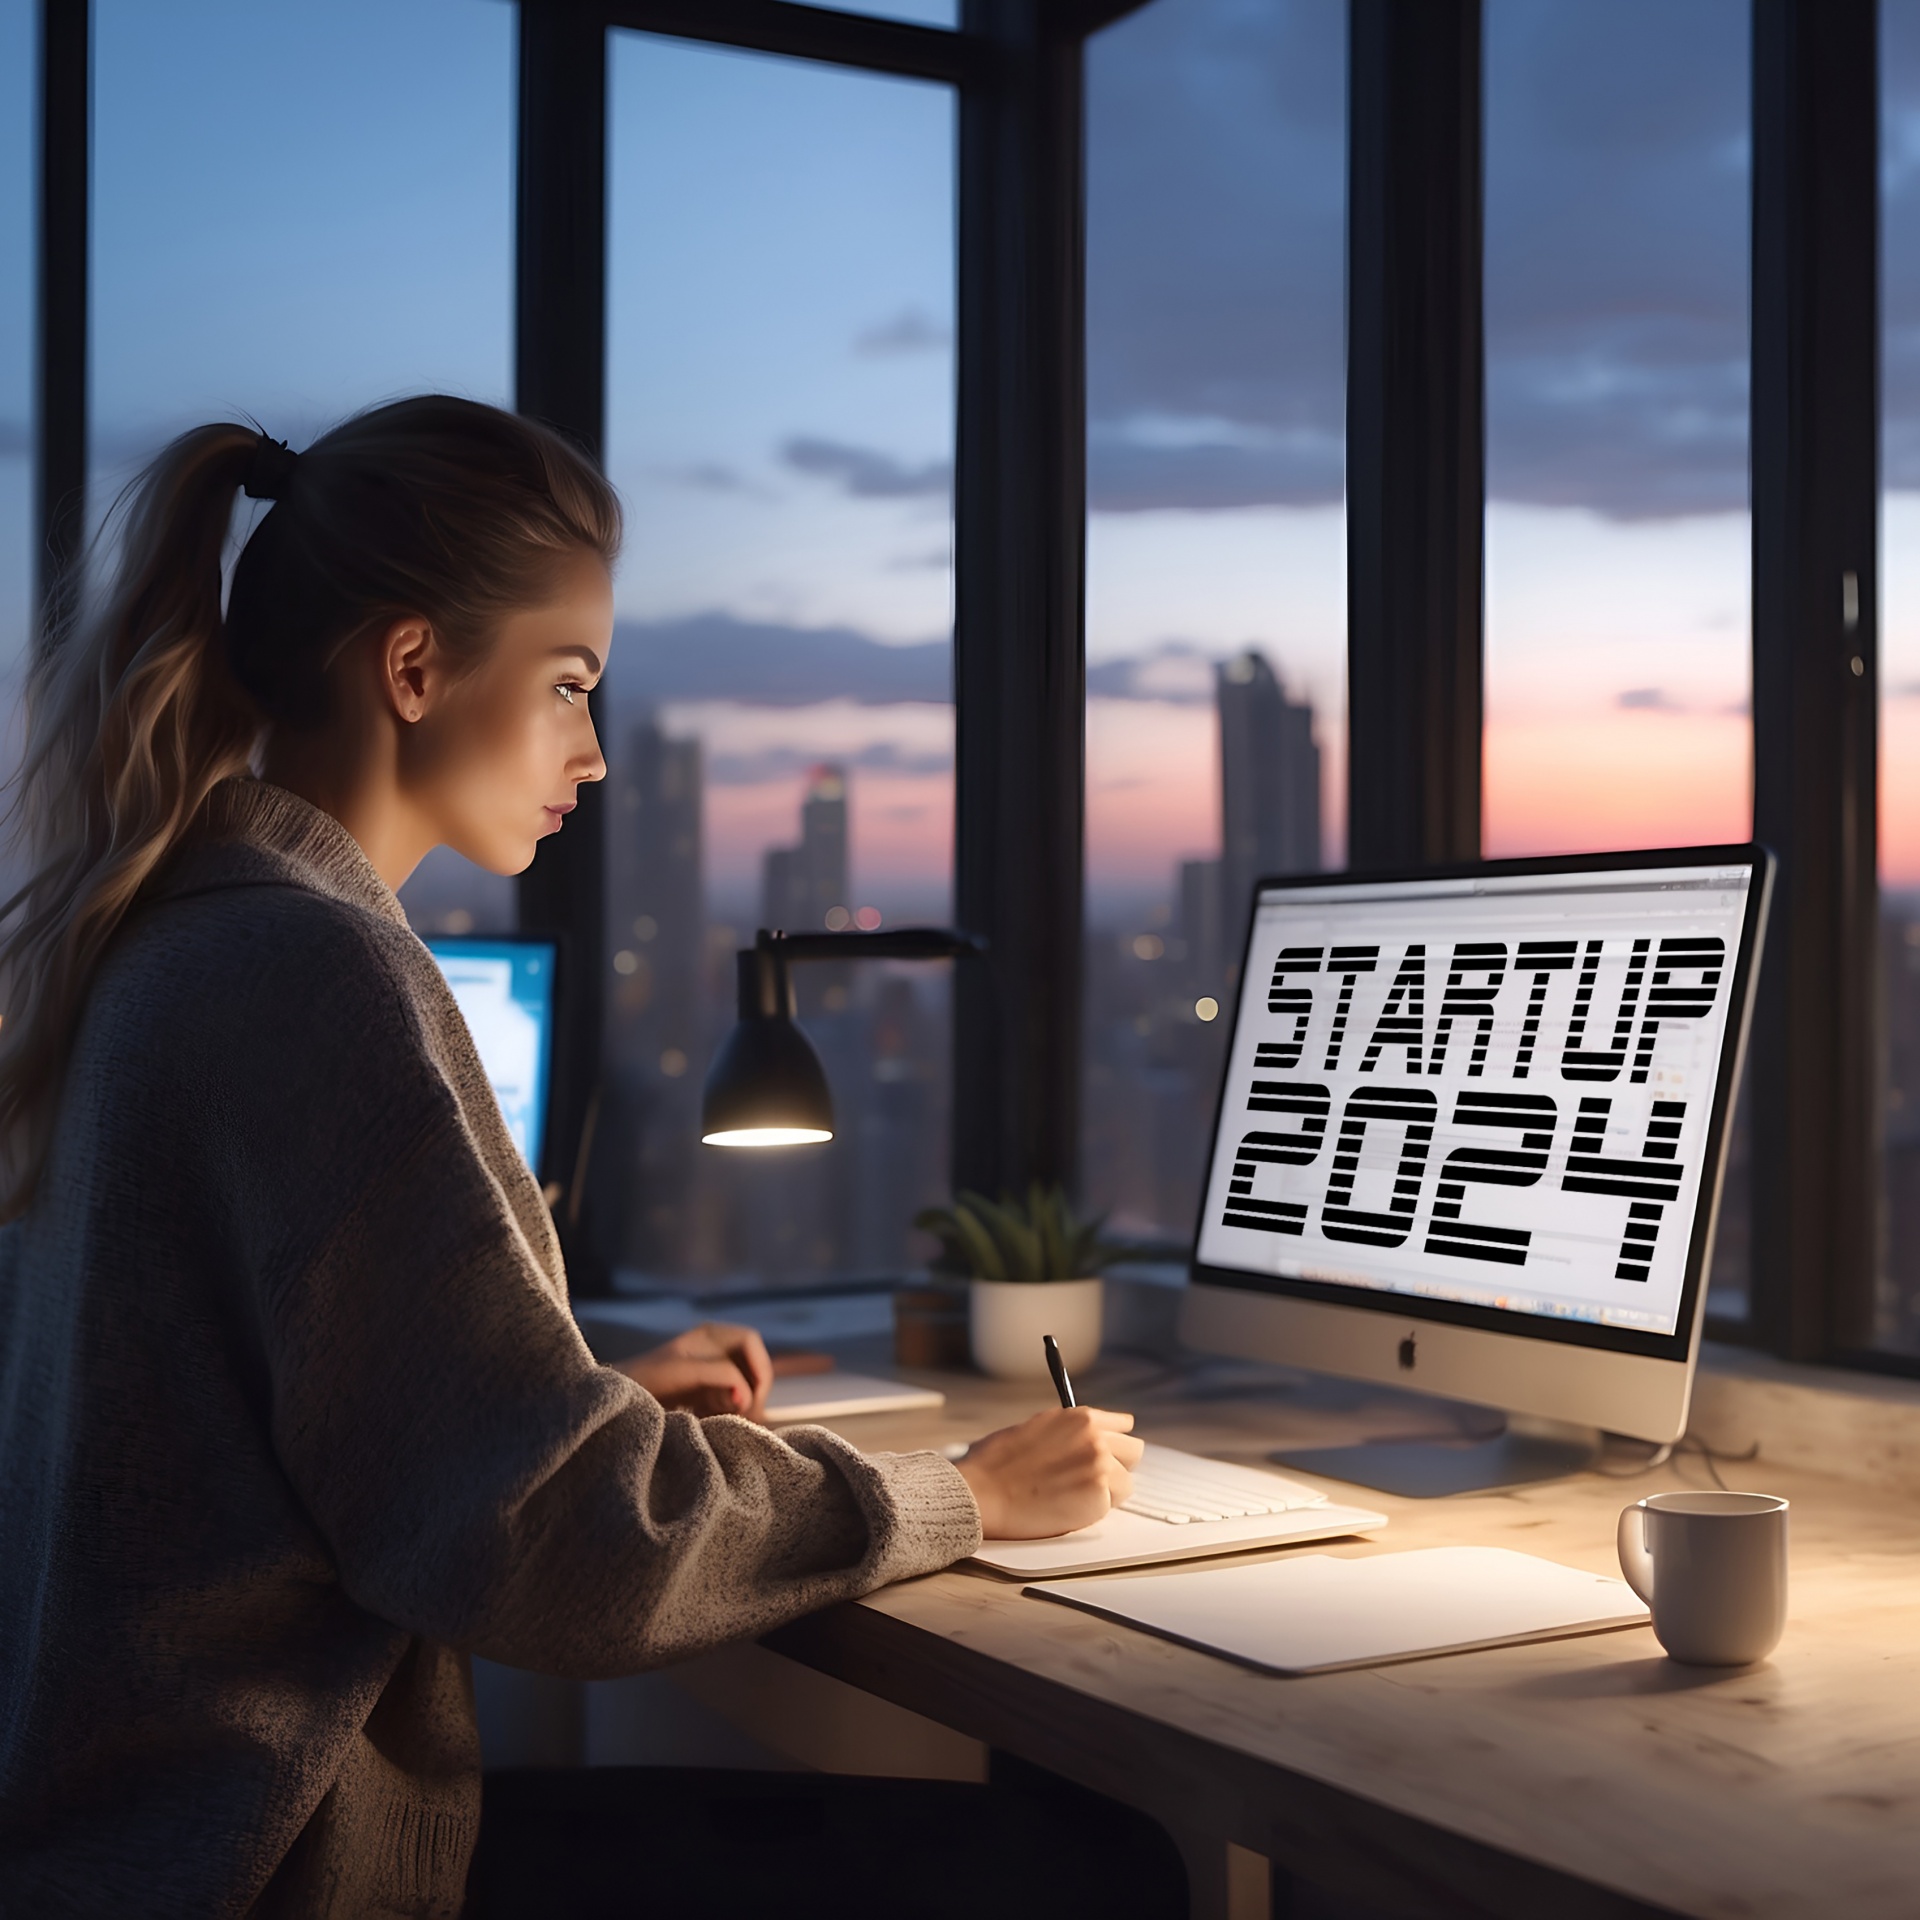 startup-2024-free-stock-photo-public-domain-pictures